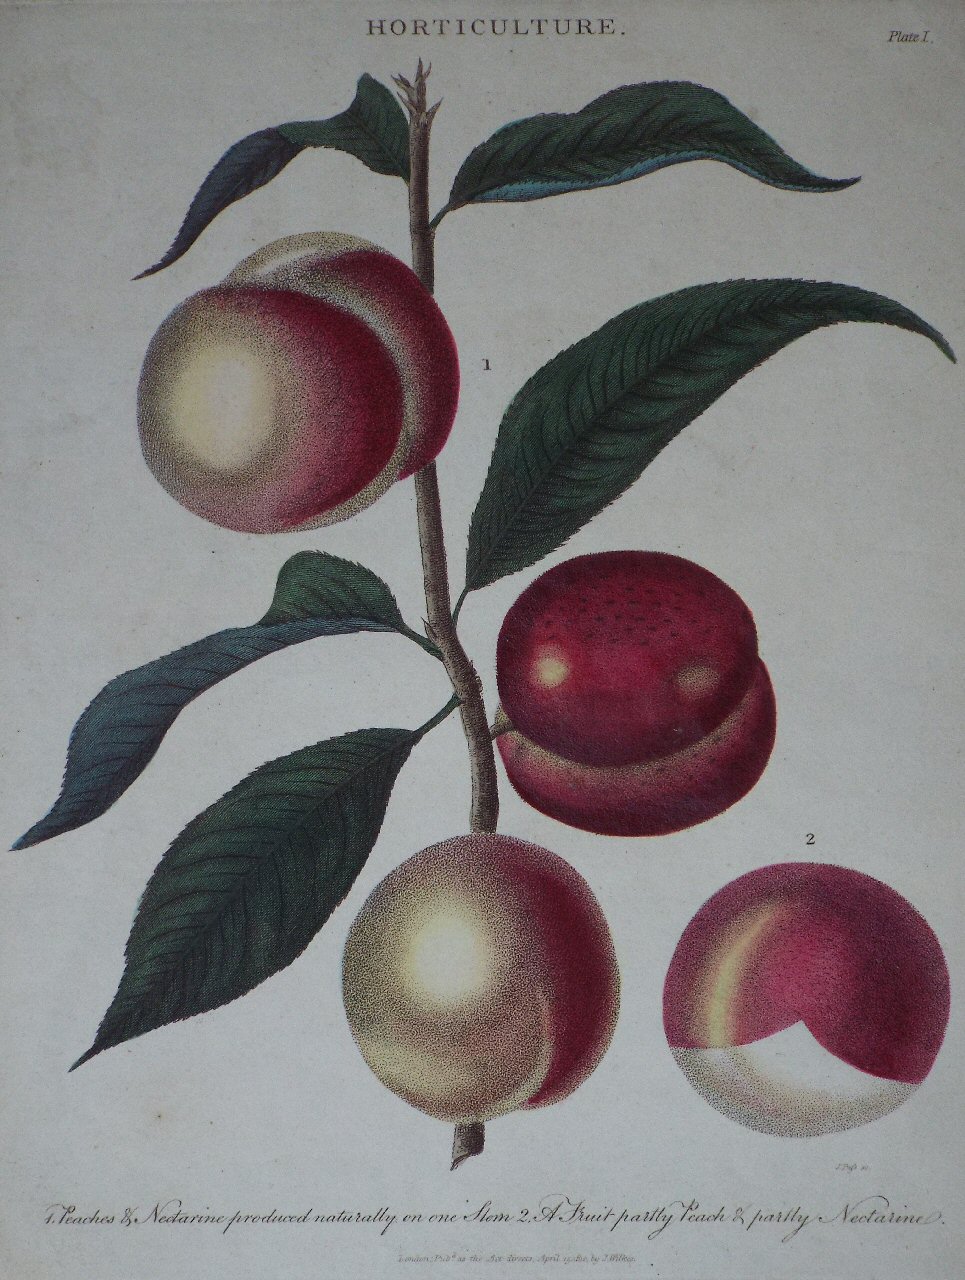 Print - Horticulture. 1. Peaches & Nectarine produced naturally on one Stem. 2. A Fruit partly Peach & partly Nectarine. - Pass